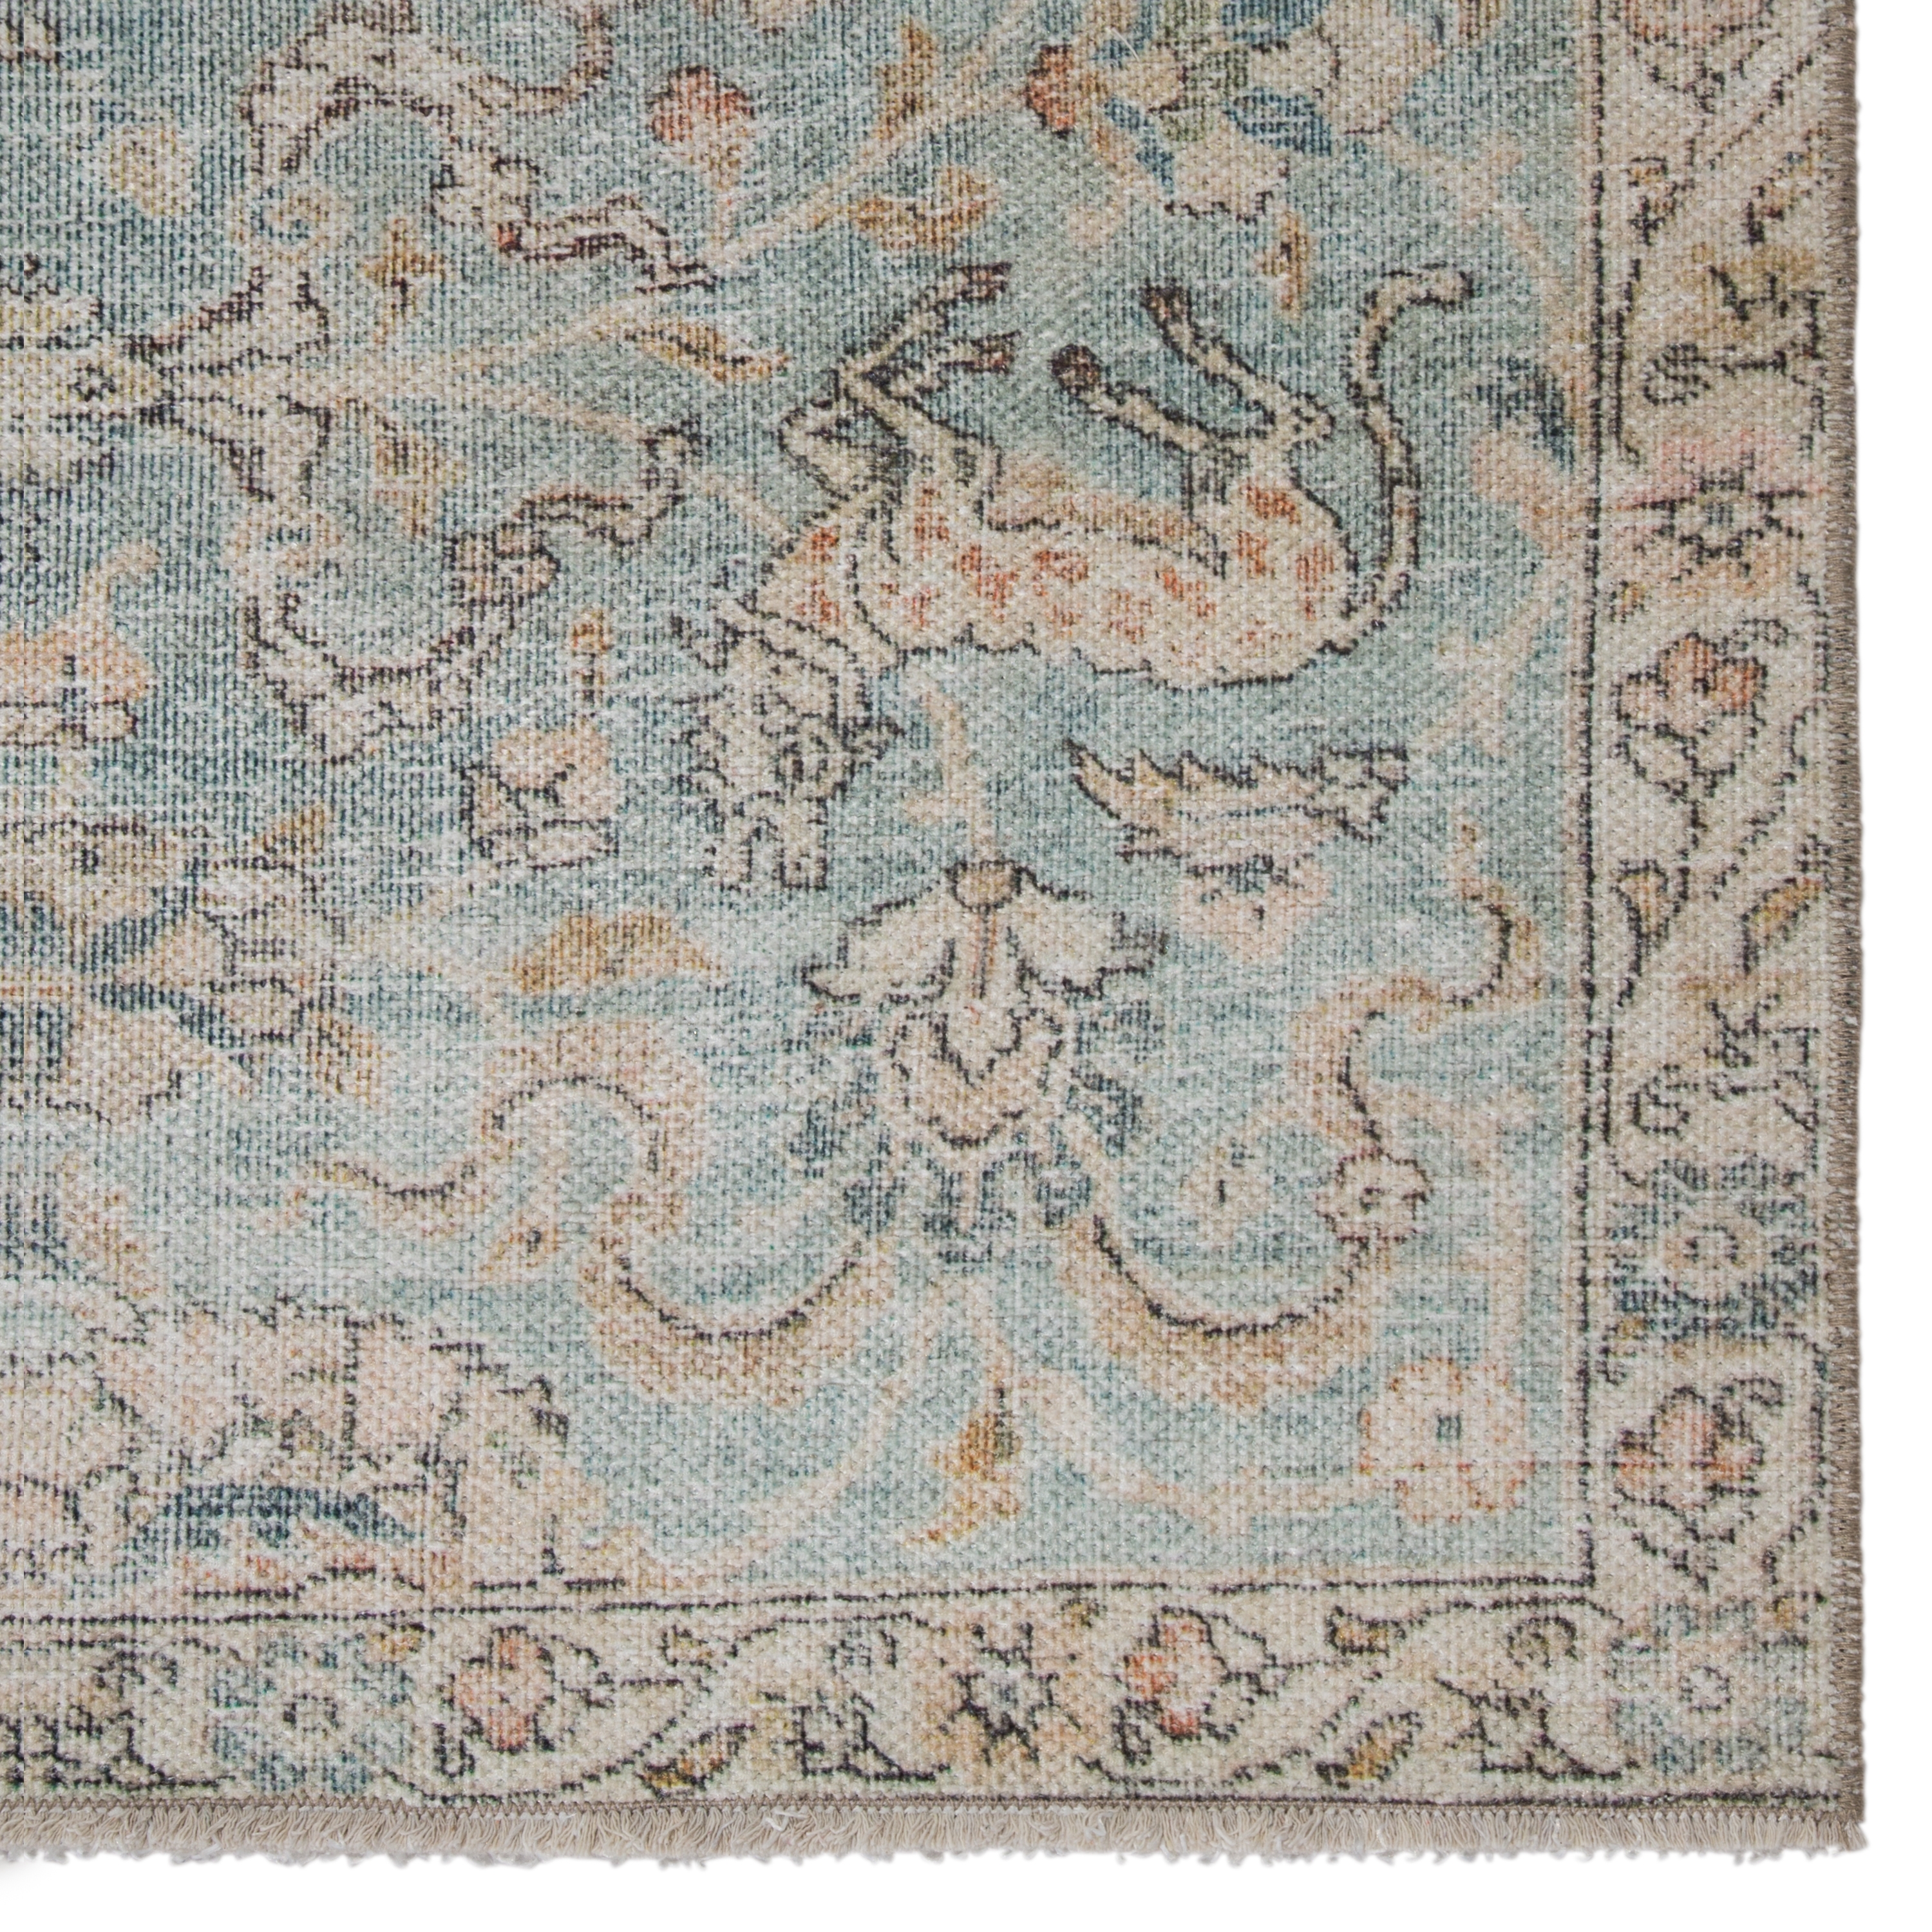 Stag Oriental Teal/ Gold Area Rug (5'X8') - Image 3